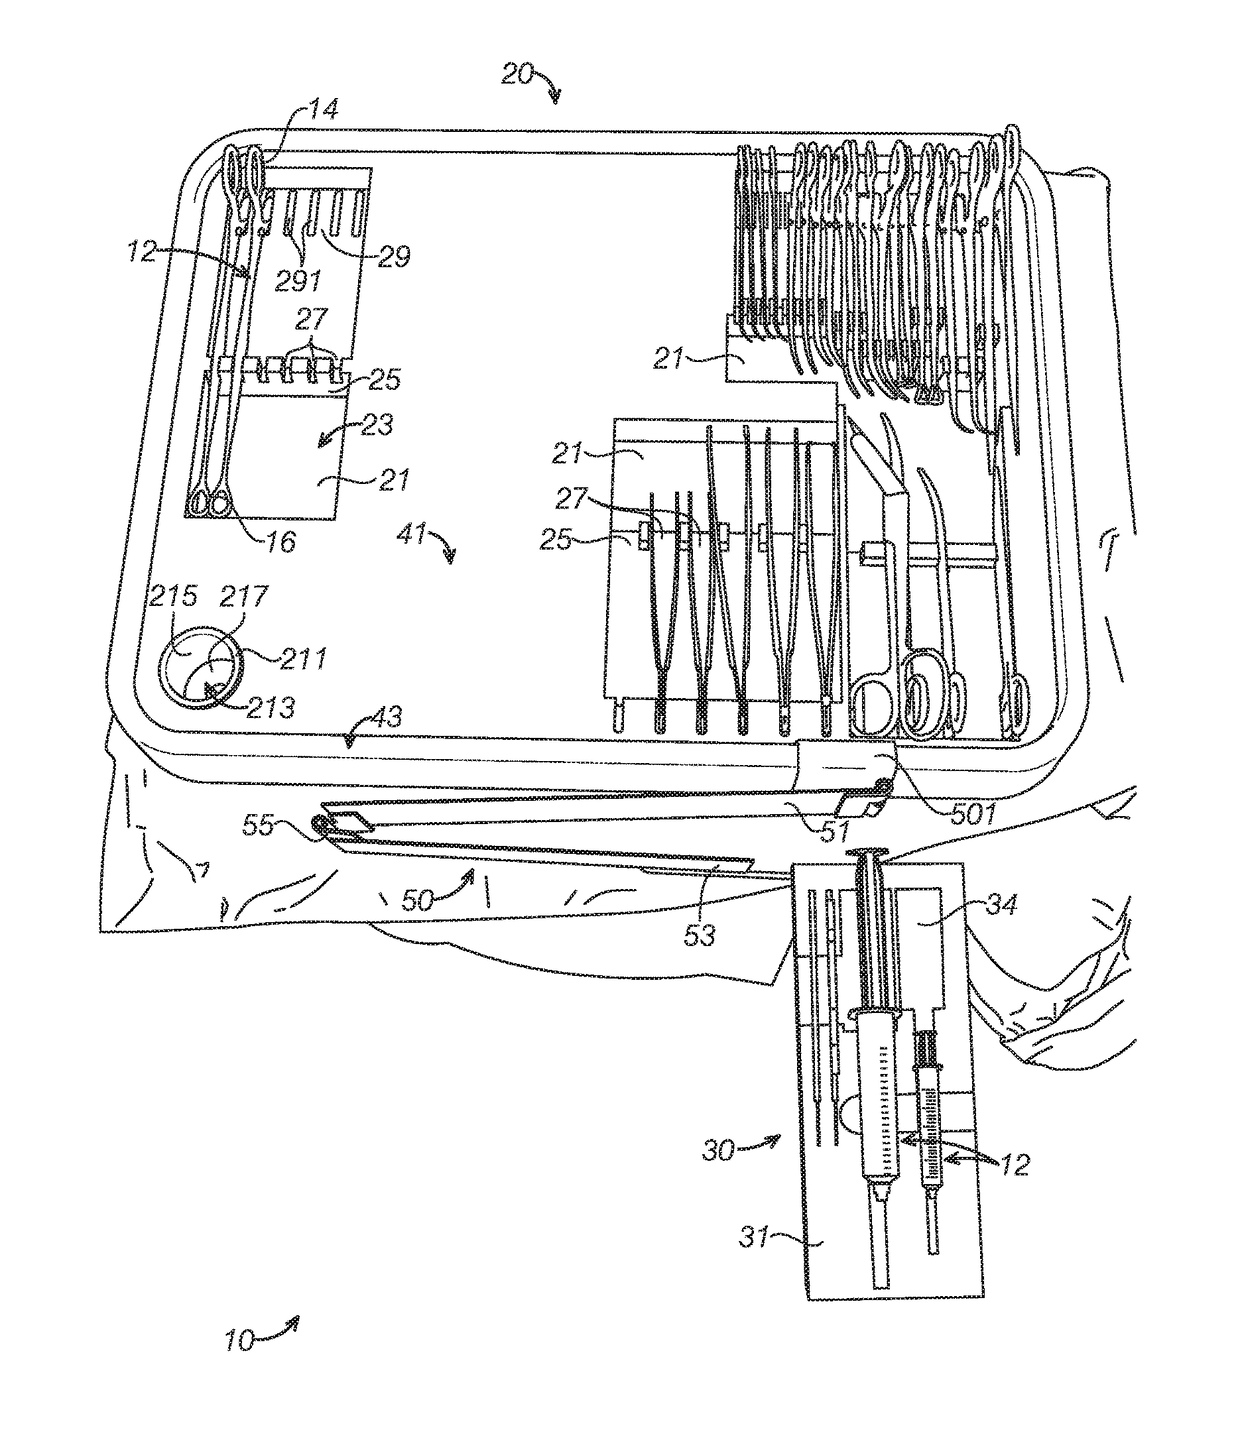 System, method and device for a medical surgery tray